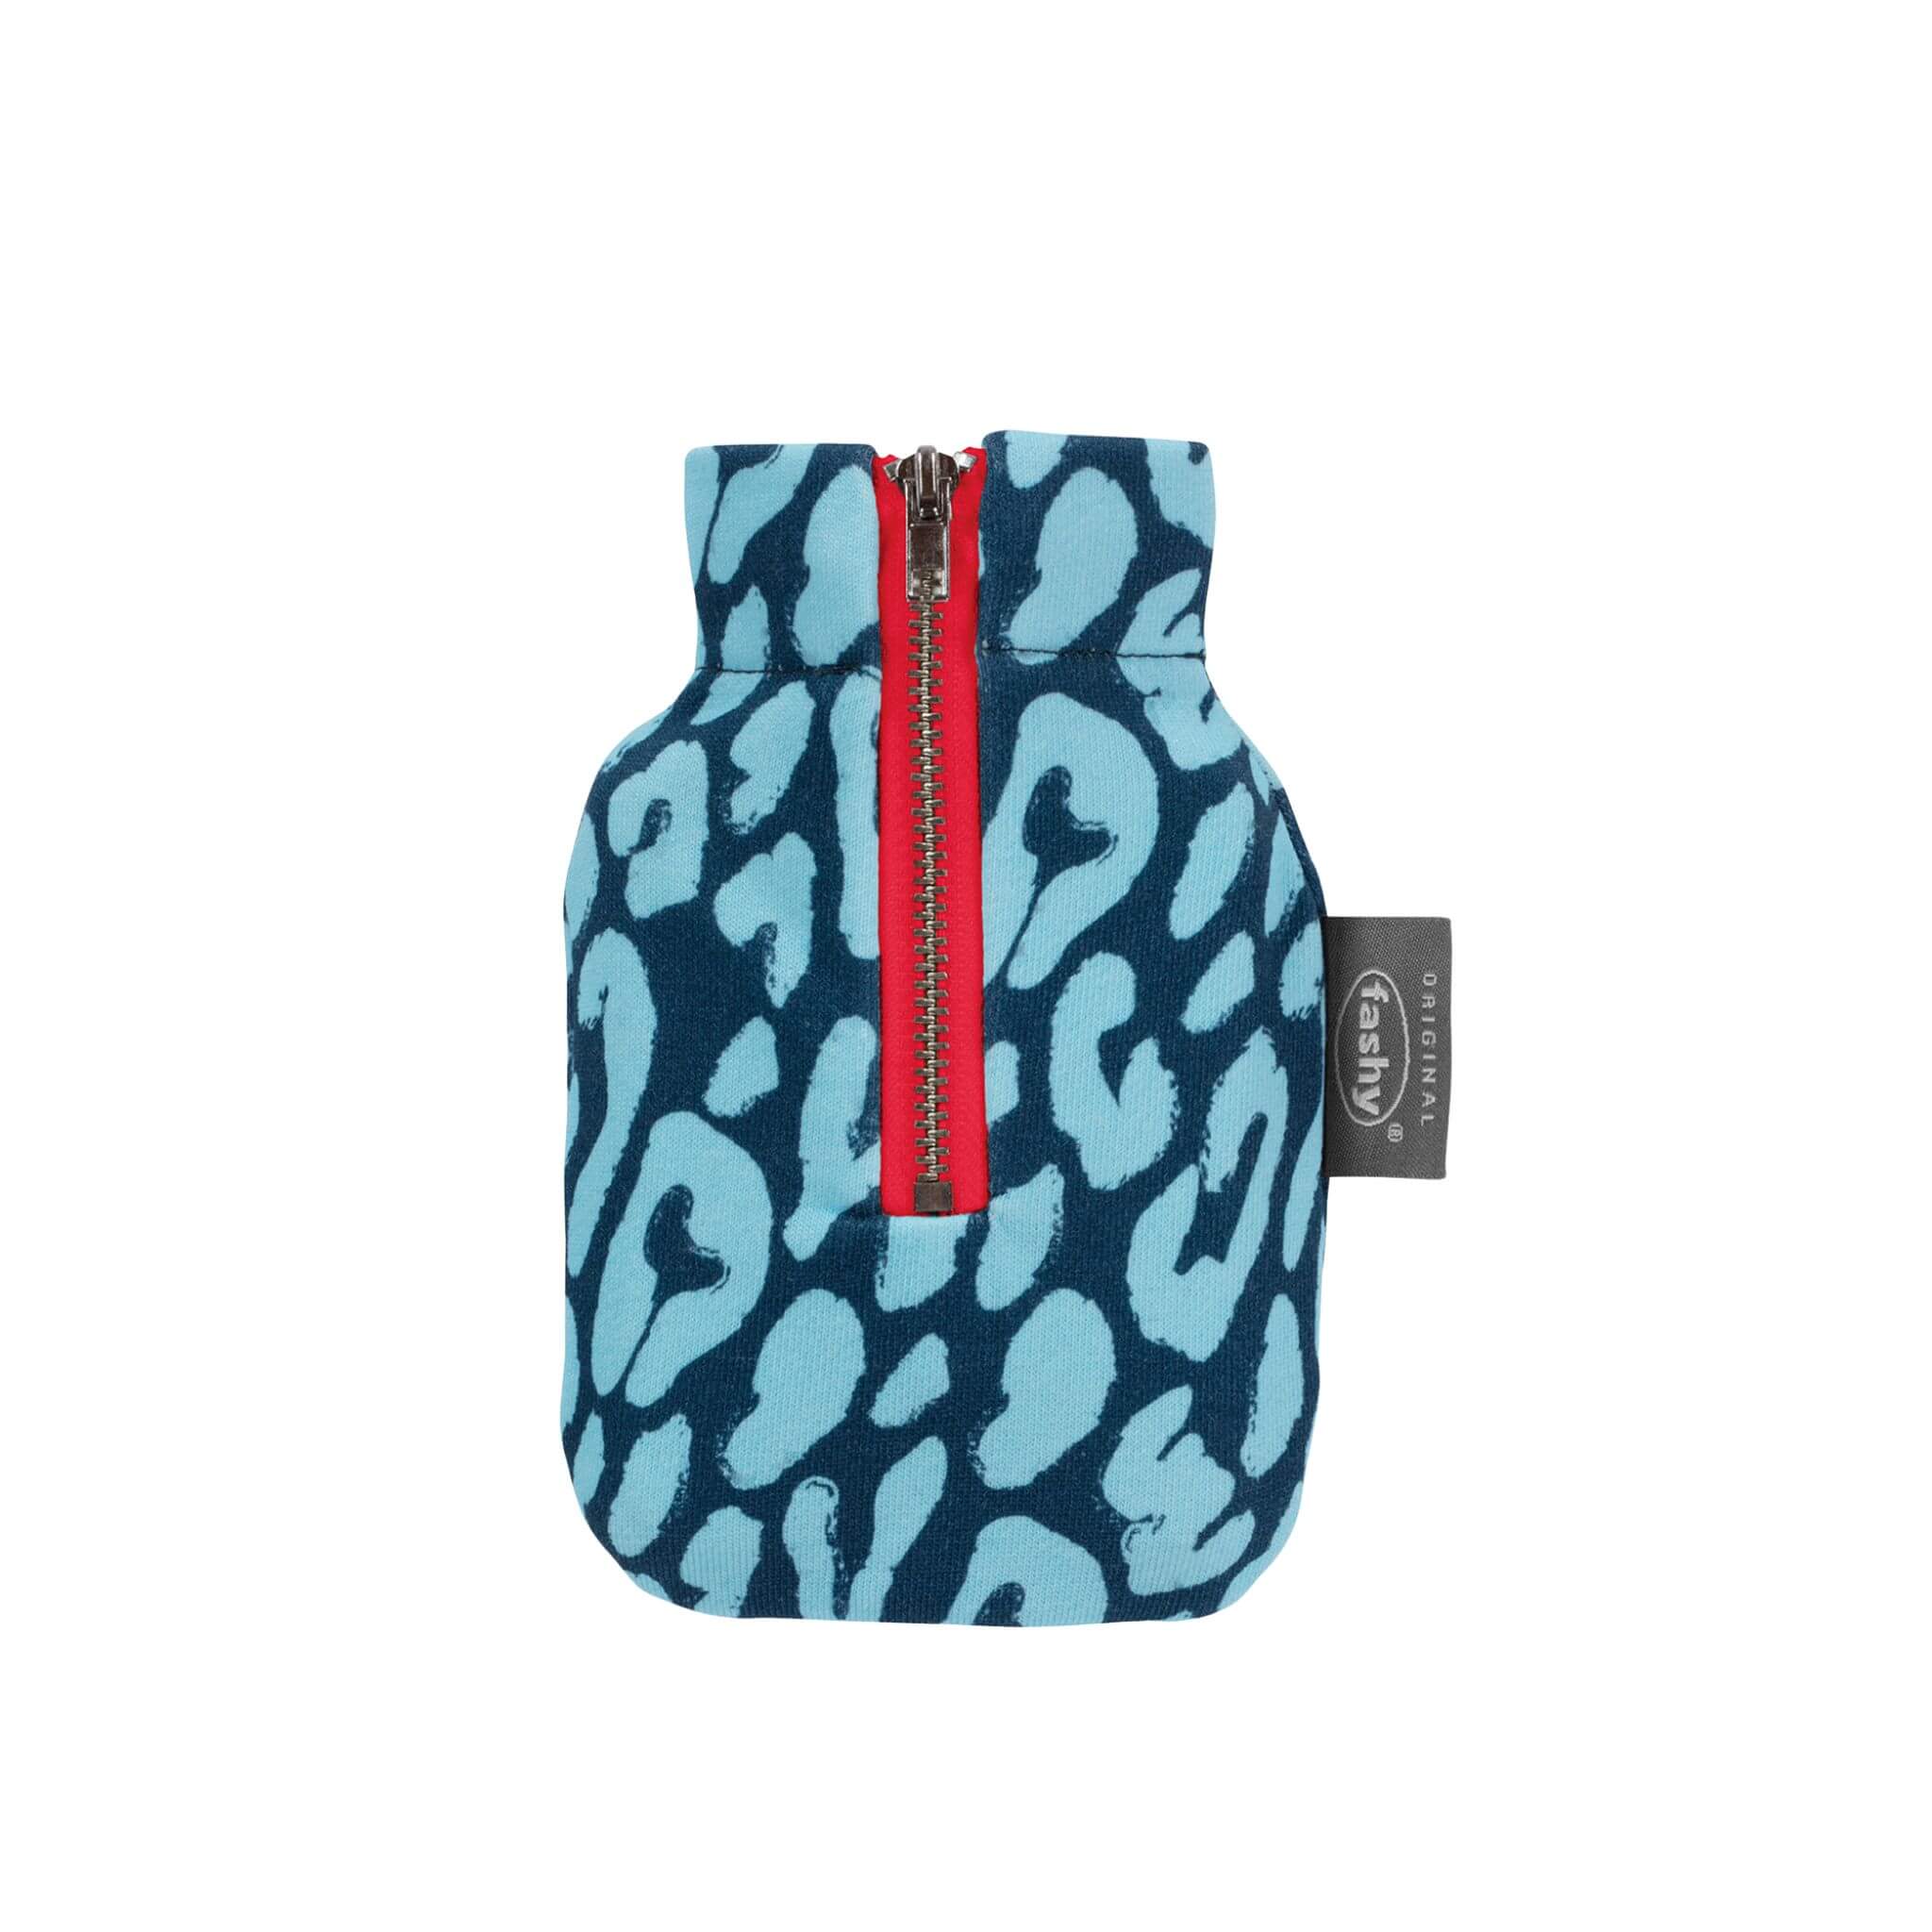 0.3 Litre Mini Hot Water Bottle Pocket Warmer with Blue and Aqua Leo Pattern Zip Cover